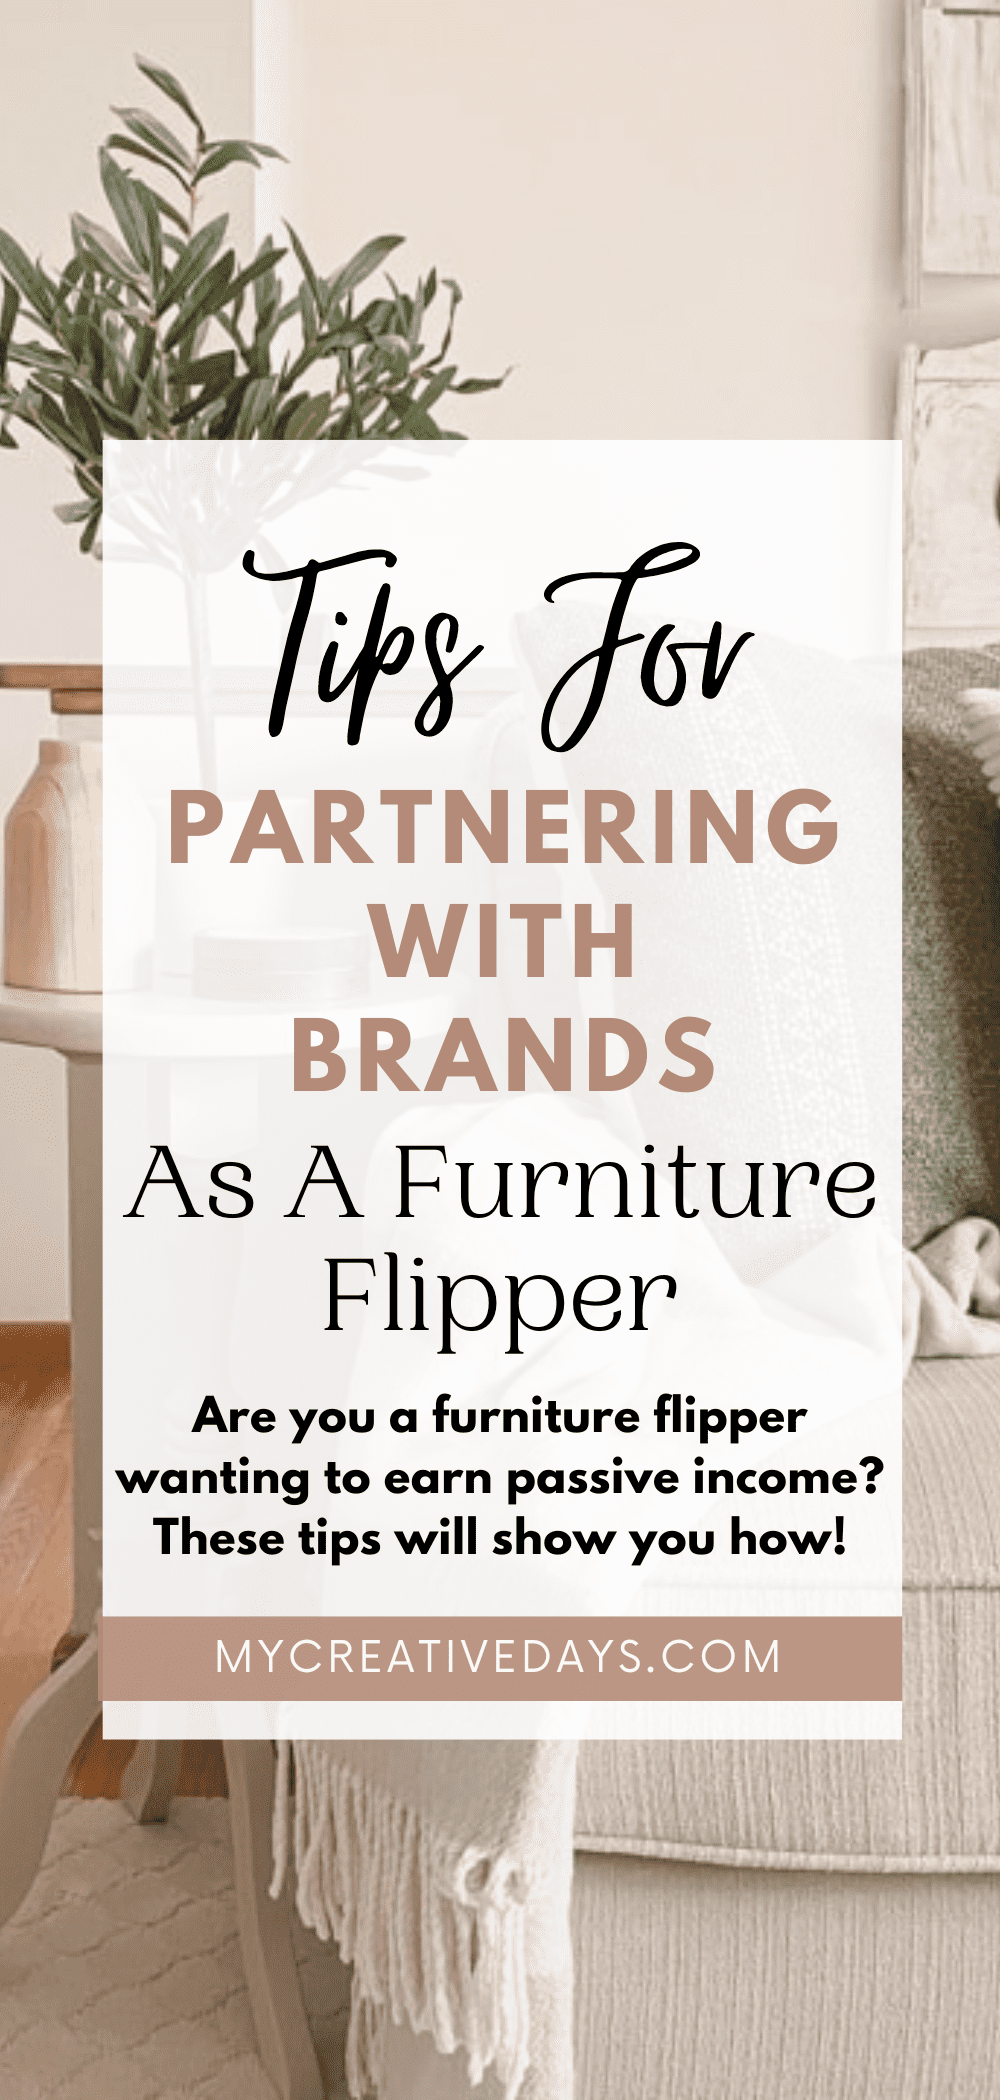 Are you a furniture flipper wanting to earn passive income? These tips for partnering with brands as a furniture flipper will show you how!